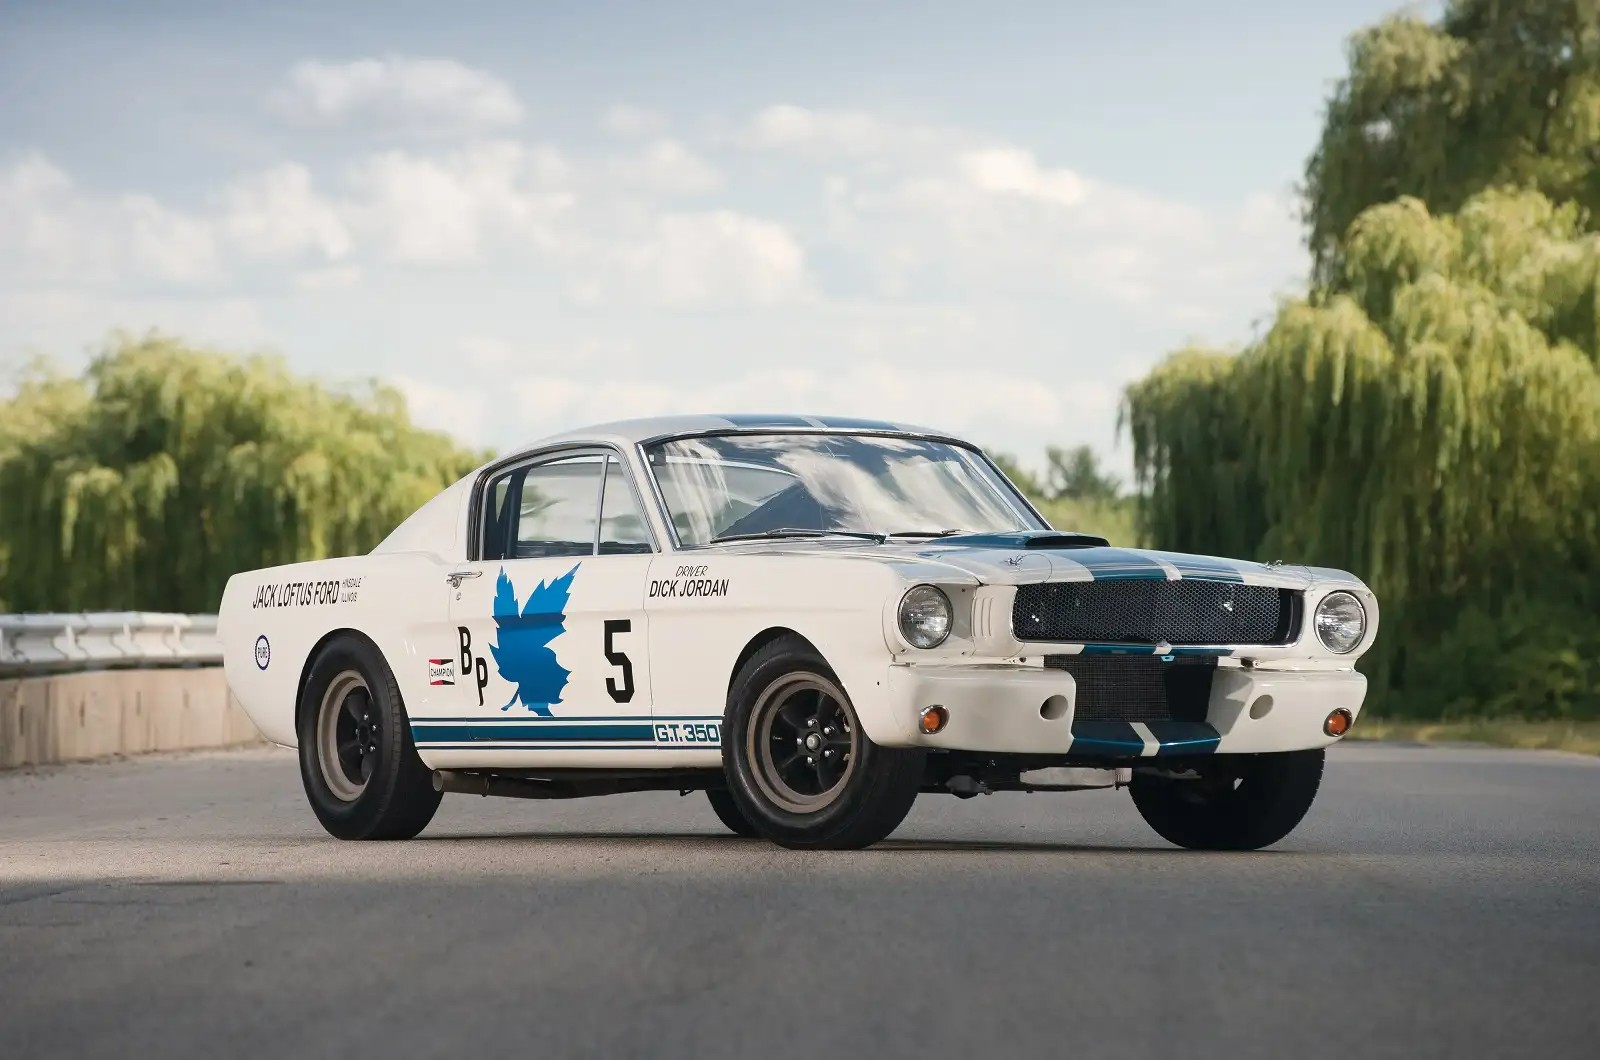 <p>In 1965, Carroll Shelby collaborated with Ford to build a purpose-built race car, reworking a Mustang into the GT350R. Its lightweight, stripped-down design included a fiberglass front apron, wide fender flares, adjusted suspension pickup points, a large 4-point roll cage, and a reworked engine yielding 325 to 360 horsepower.</p><p>The Shelby GT350R had a historic 17-race winning streak from 1968-1969, and reached a record speed of 184 mph at Daytona. The GT350R is forever emblazoned in our minds with its iconic white body and blue stripes.</p>